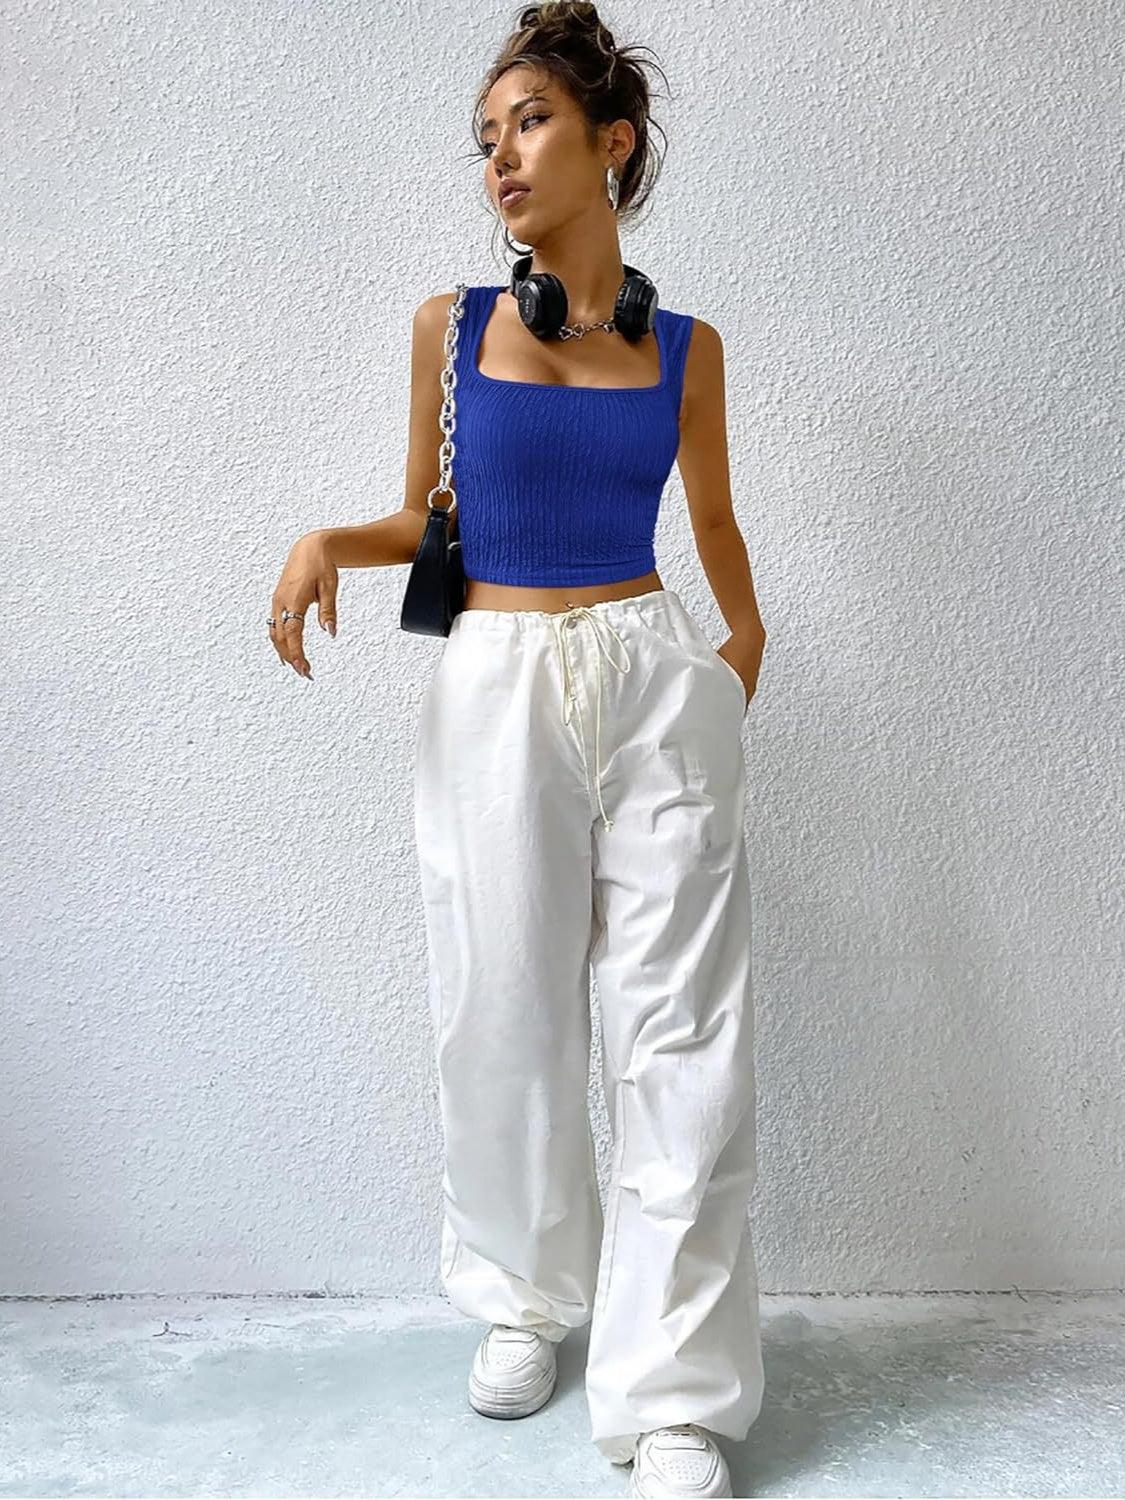 a woman wearing white pants and a blue top